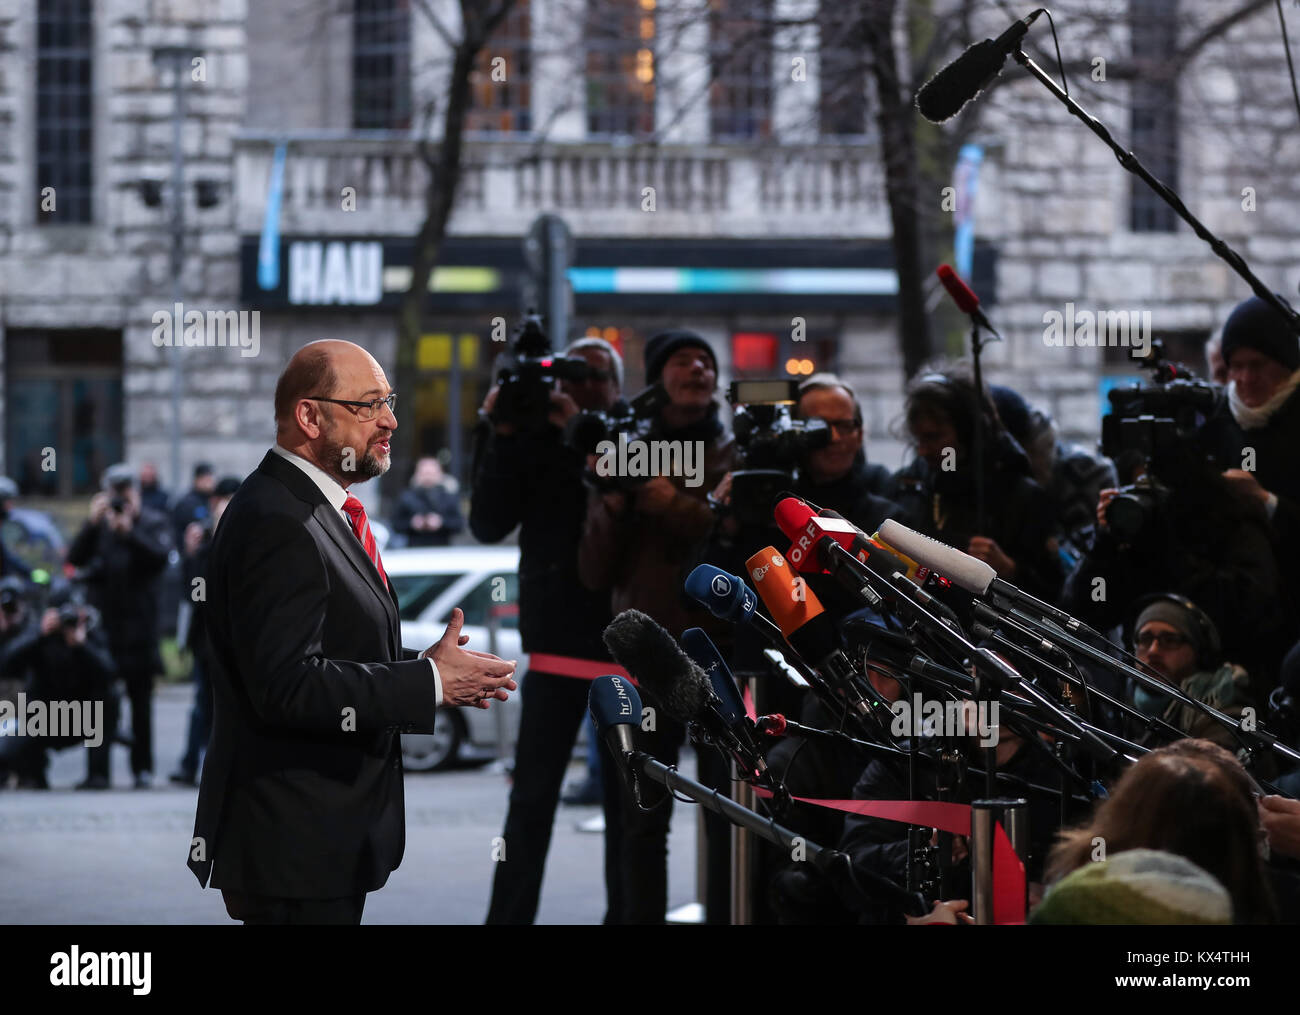 Berlin, Germany. 7th Jan, 2018. Leader of German Social Democratic Party (SPD) Martin Schulz speaks before the exploratory talks for a new coalition government between the Christian Democratic Union (CDU), Christian Social Union (CSU) and the SPD at the headquarters of SPD in Berlin, capital of Germany, on Jan. 7, 2018. Credit: Shan Yuqi/Xinhua/Alamy Live News Stock Photo